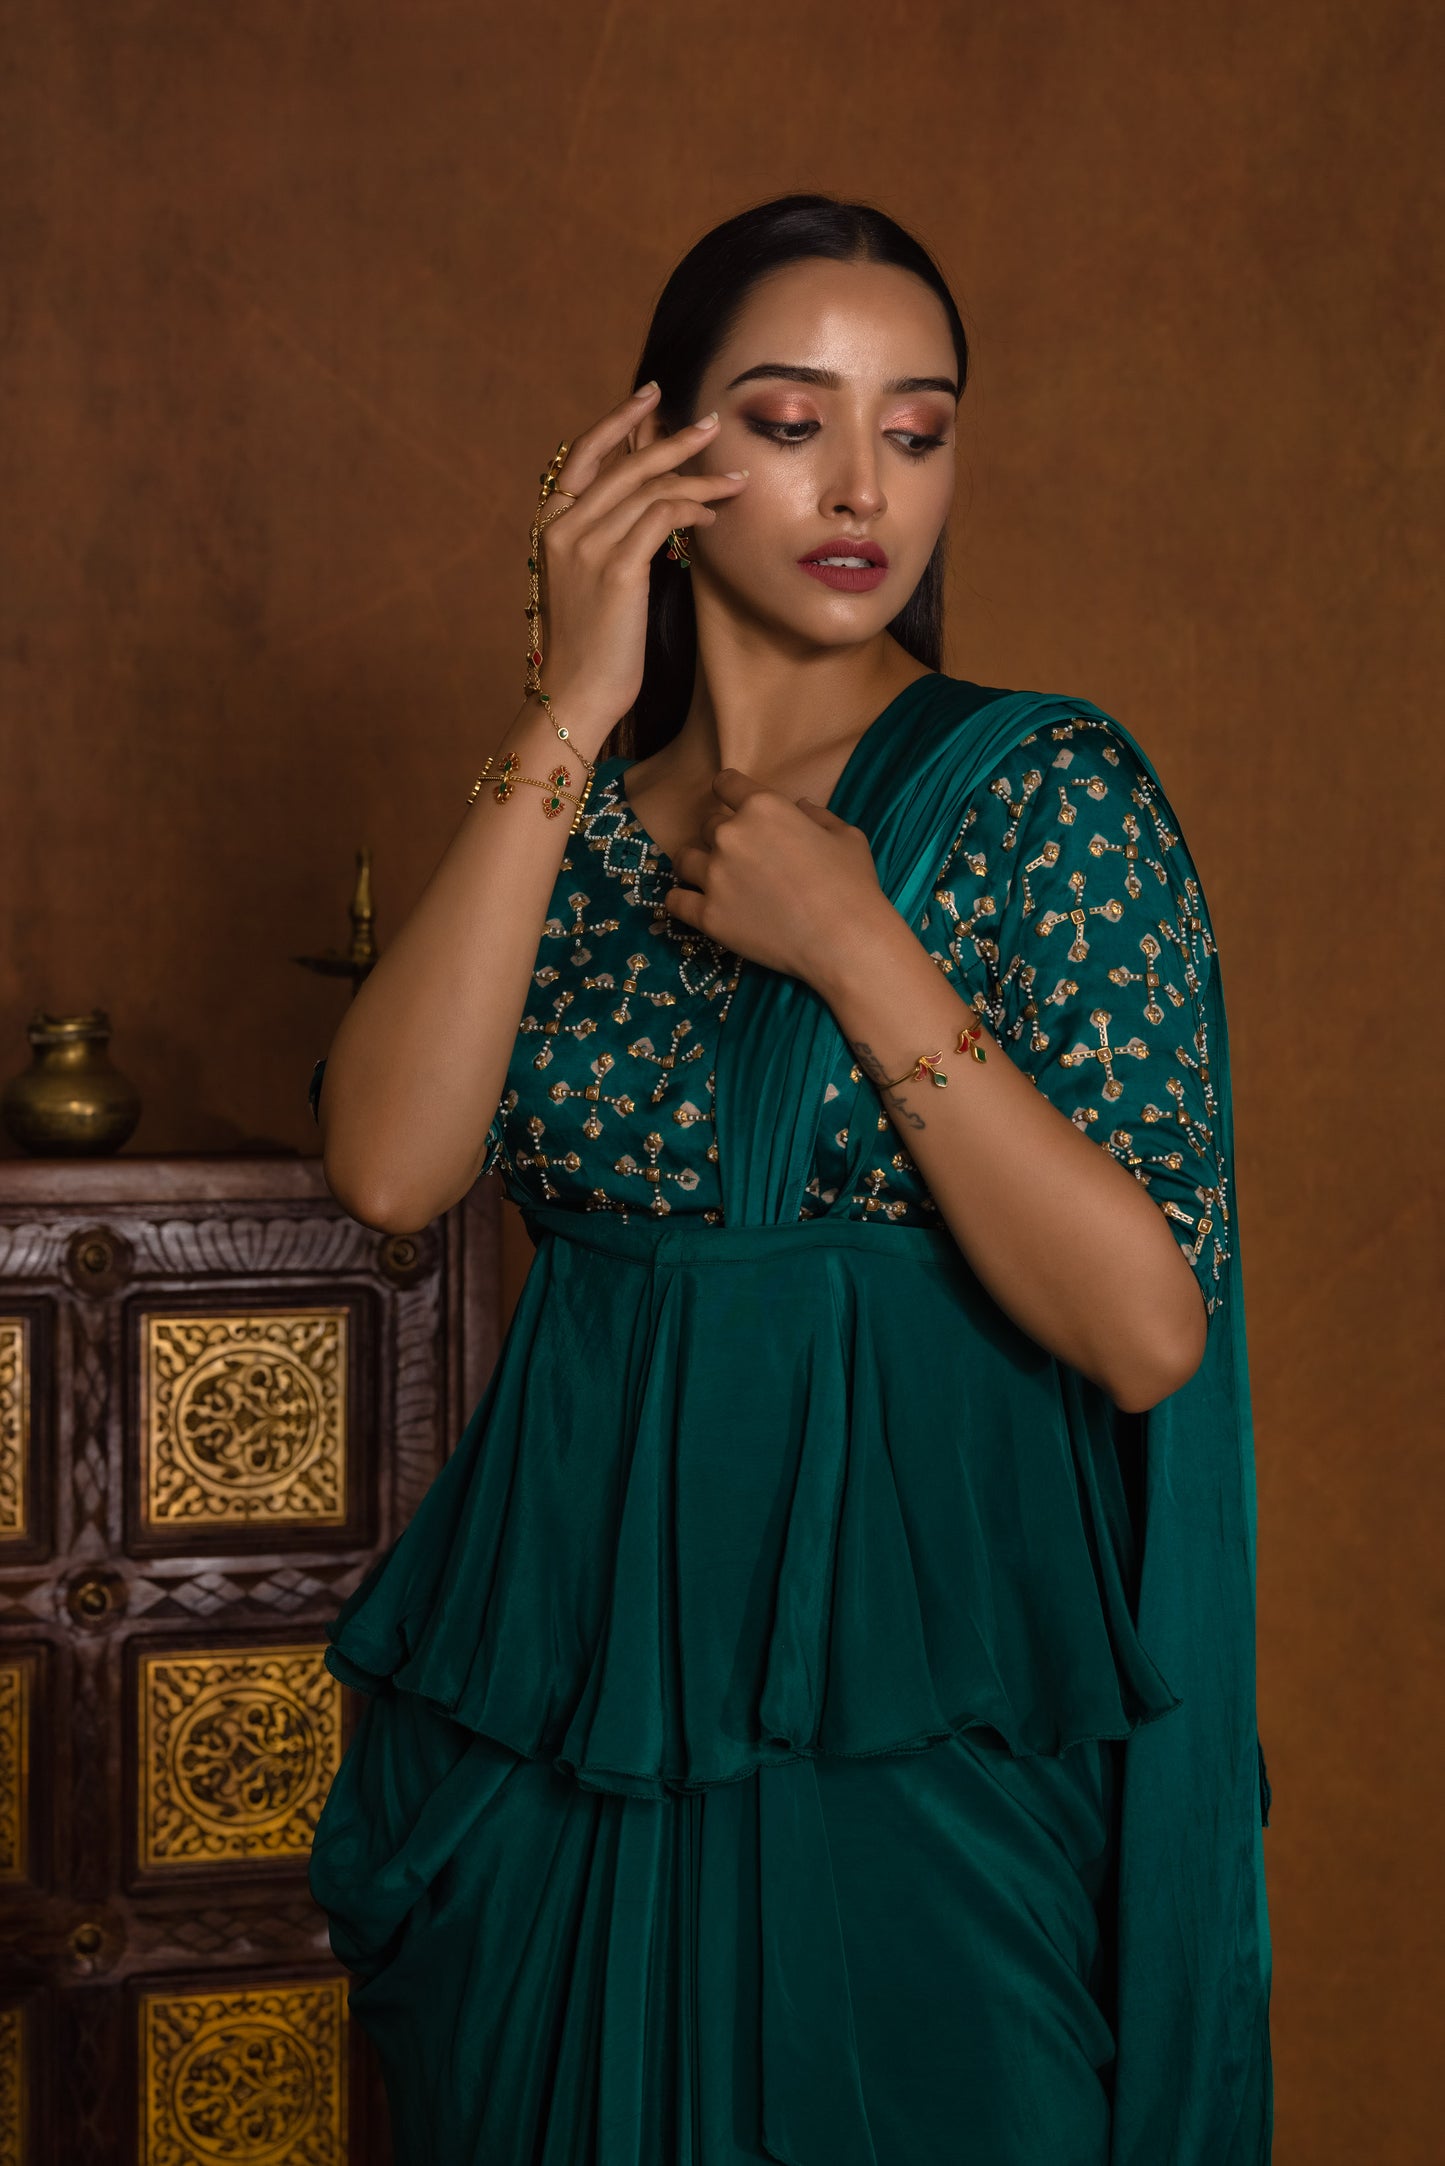 
                  
                    Bandhani embroidered blouse with draped wrap saree styled with suspender peplum
                  
                